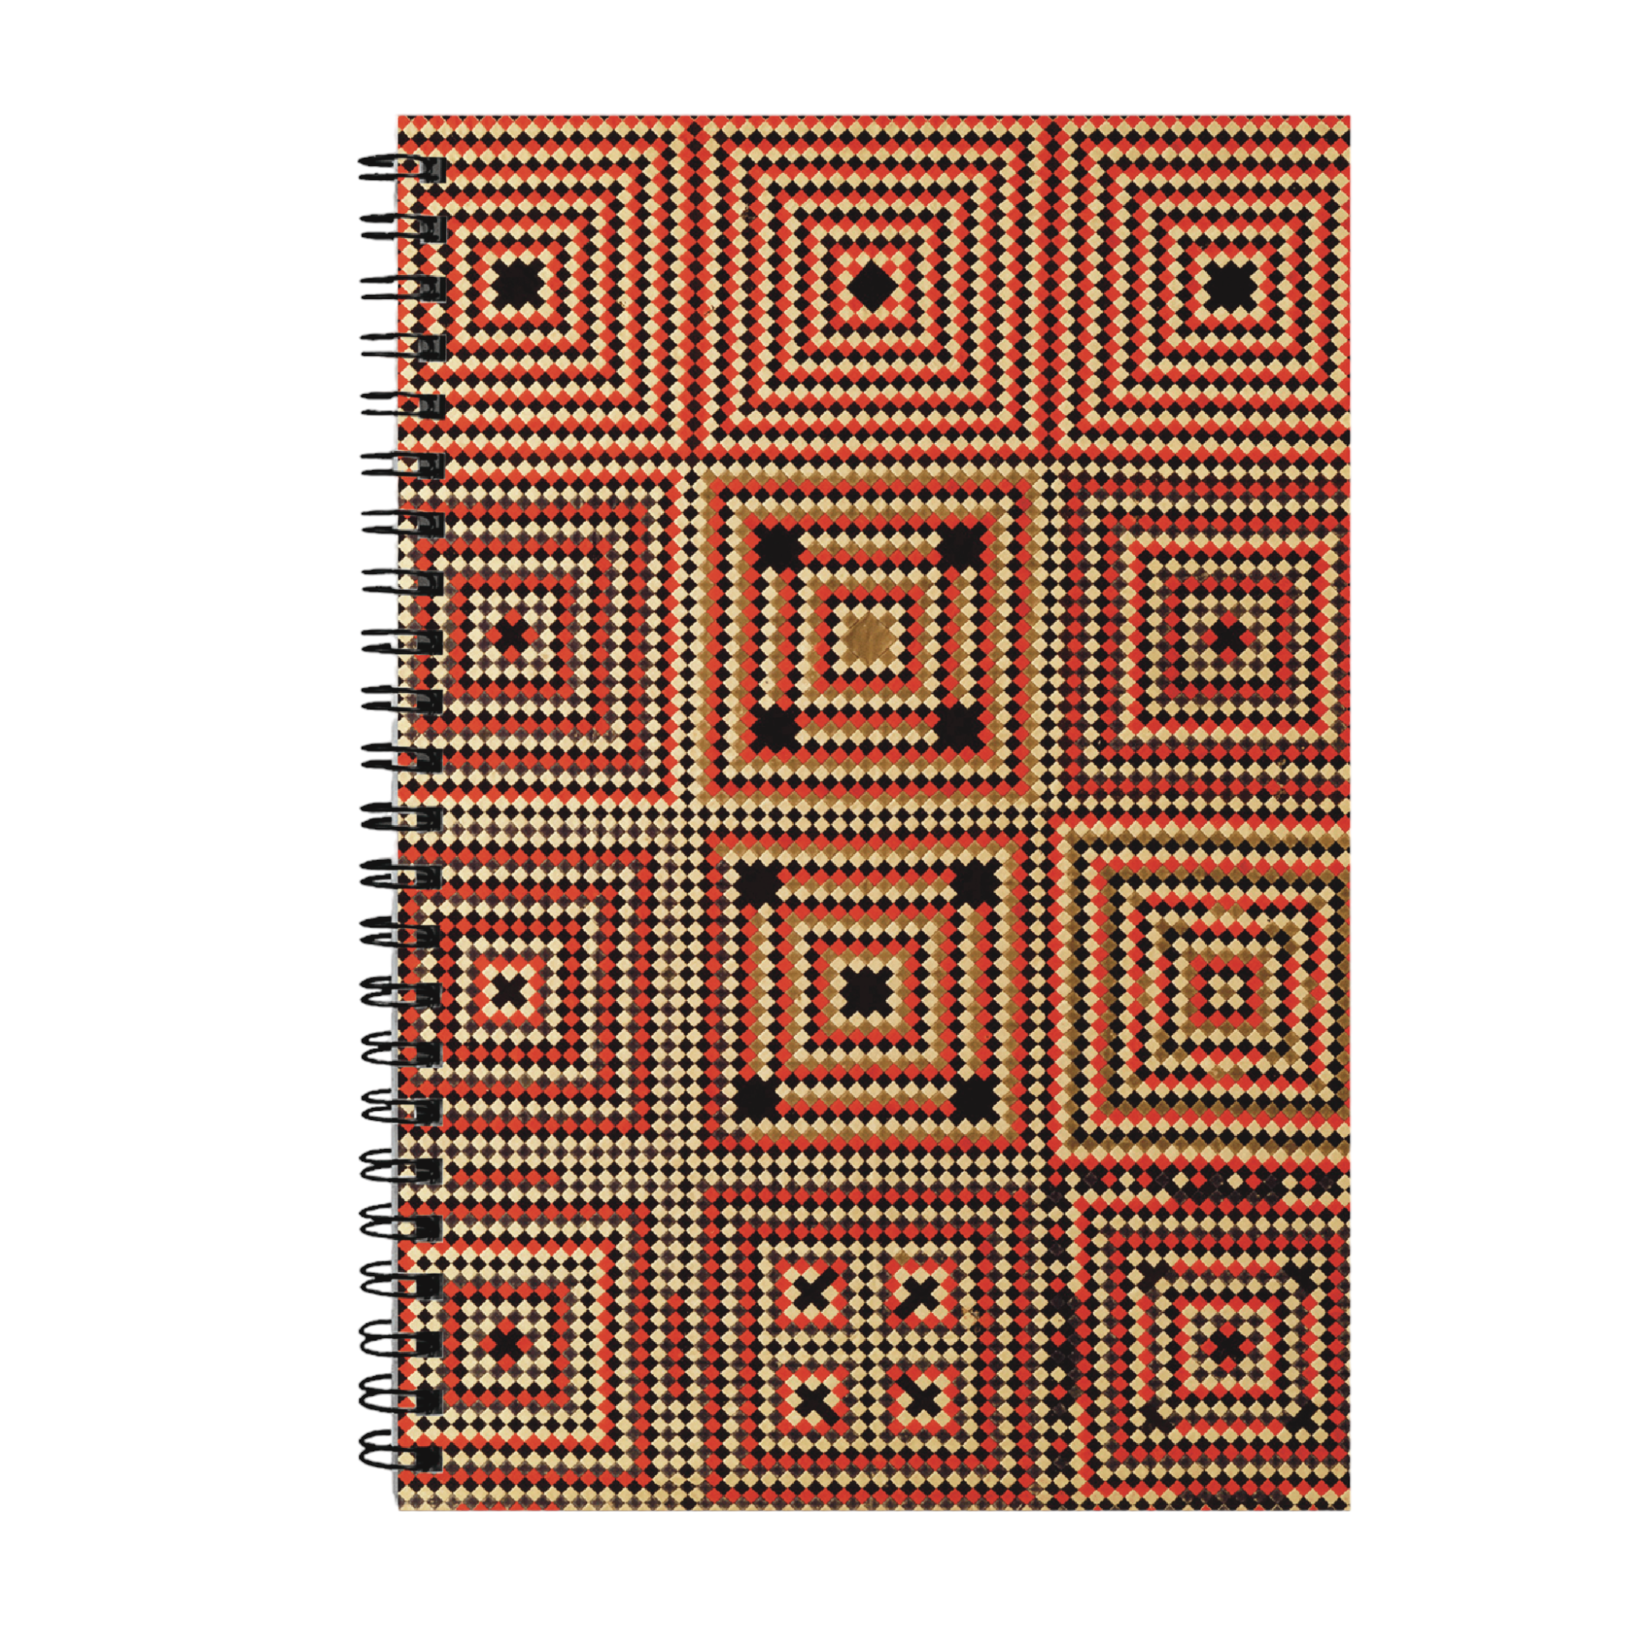 MUSEUM STORE PRODUCTS Soldier's Quilt Spiral Notebook